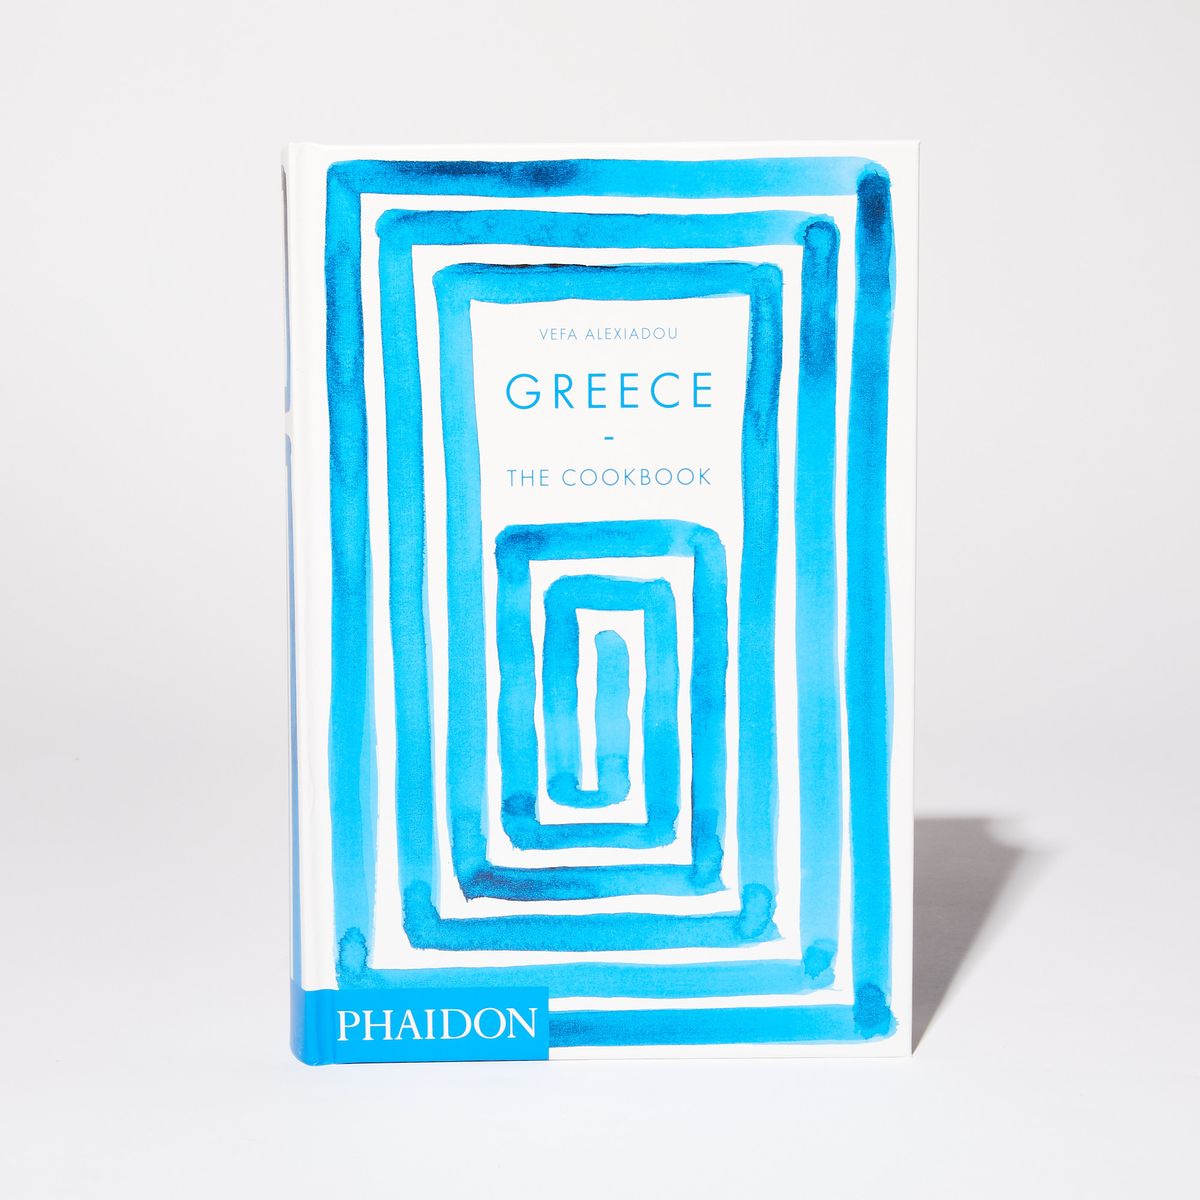 Book cover with hand-painted blue rectangular pattern with the title "Greece: The Cookbook"